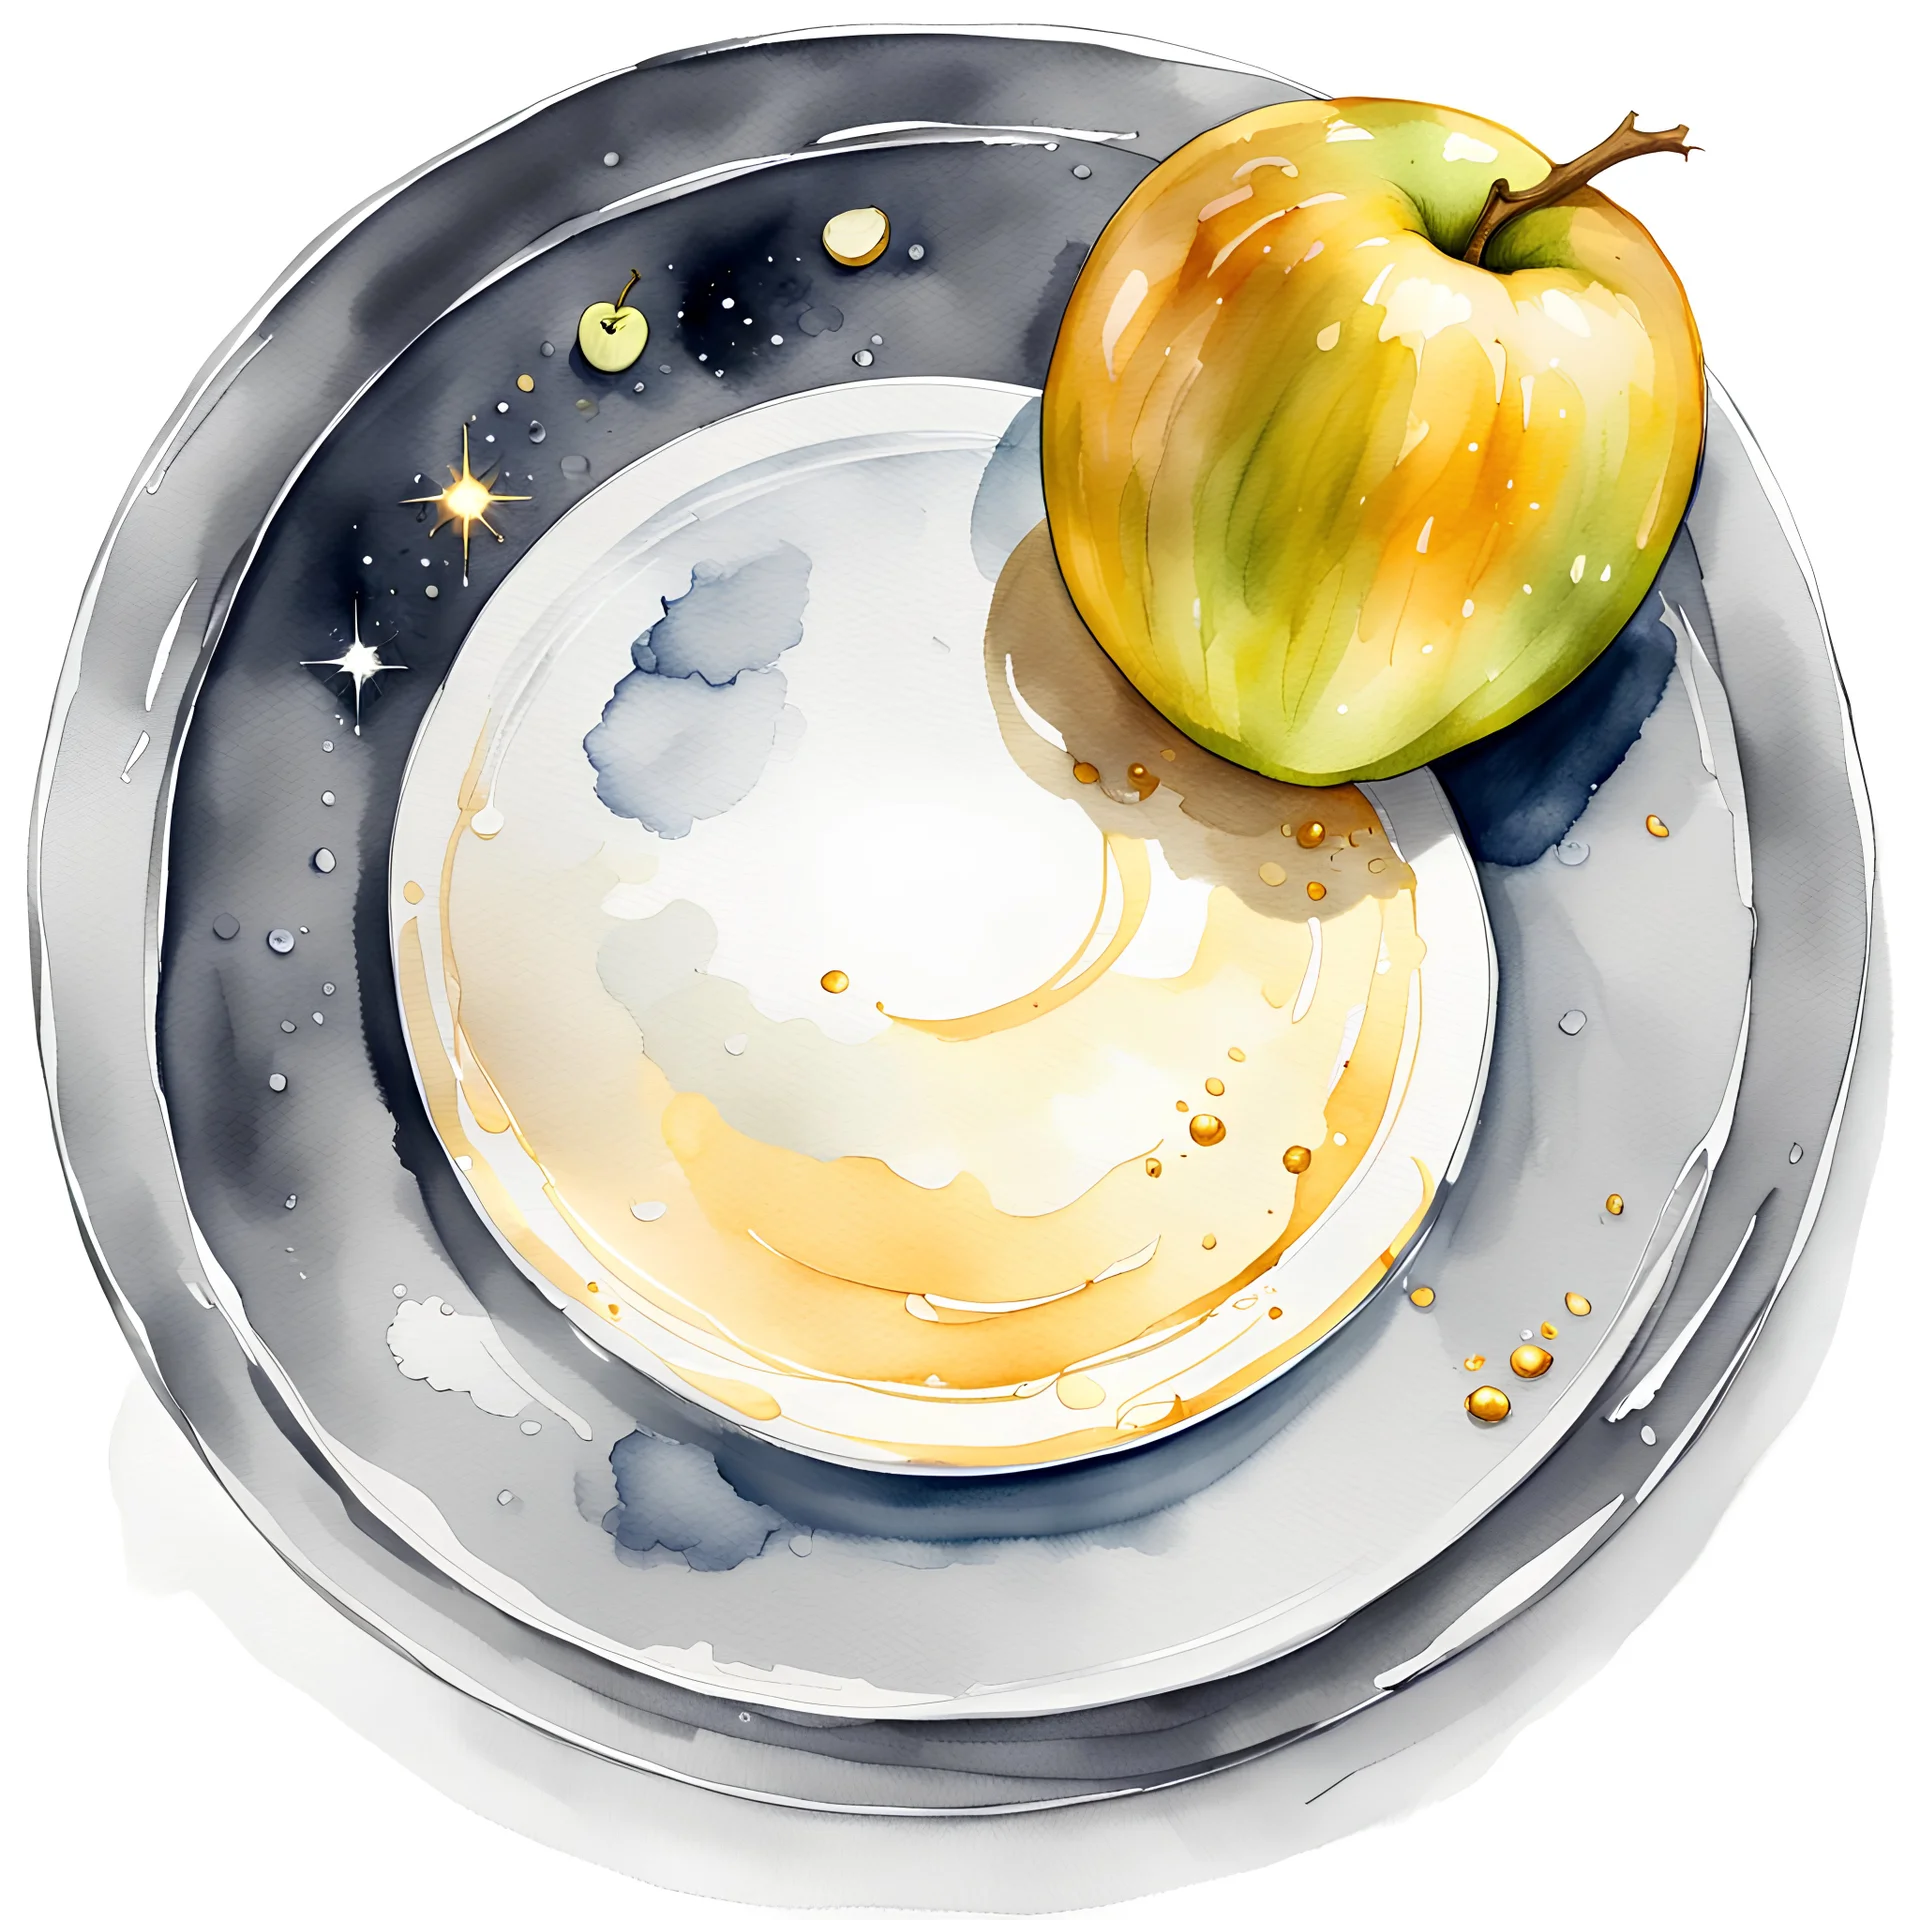 watercolor drawing of a silver saucer and a liquid gold apple. The moon and the sun are on a platter. on a white background, Trending on Artstation, {creative commons}, fanart, AIart, {Woolitize}, by Charlie Bowater, Illustration, Color Grading, Filmic, Nikon D750, Brenizer Method, Perspective, Depth of Field, Field of View, F/2.8, Lens Flare, Tonal Colors, 8K, Full-HD, ProPhoto RGB, Perfectionism, Rim Lighting, Natural Lighting, Soft Lighting, Acc